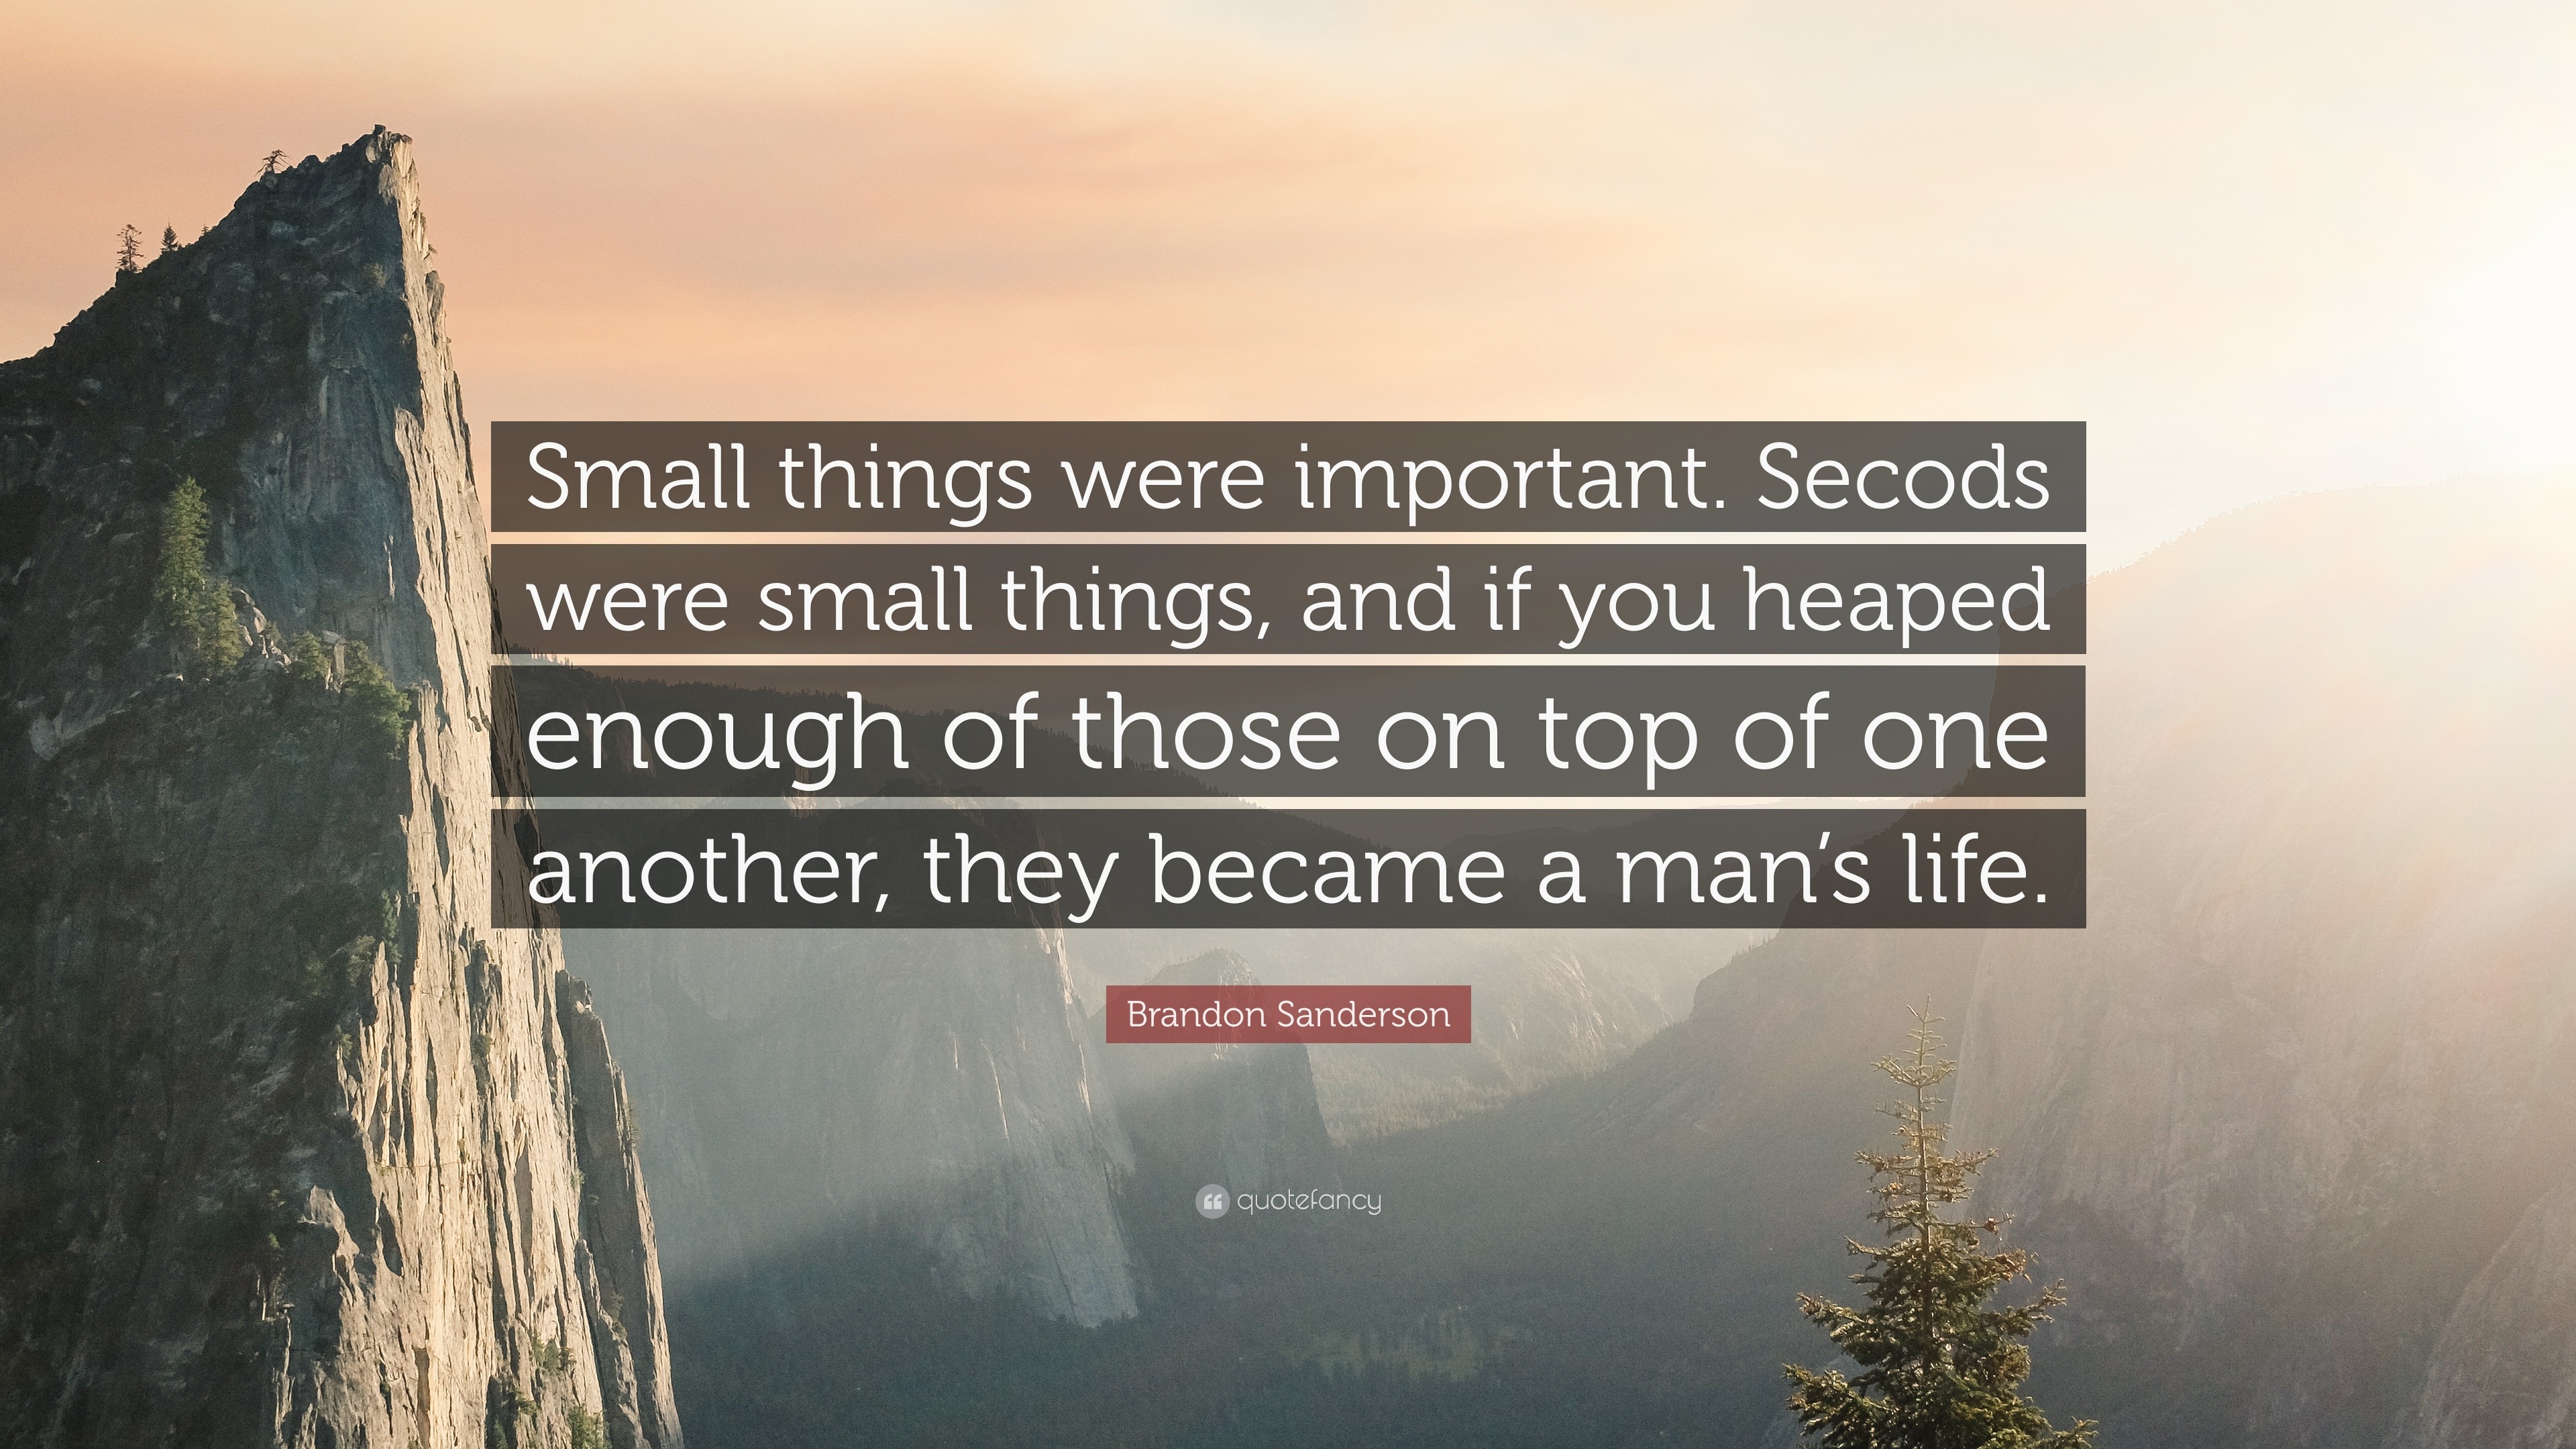 Brandon Sanderson Quote “Small things were important Secods were small things and